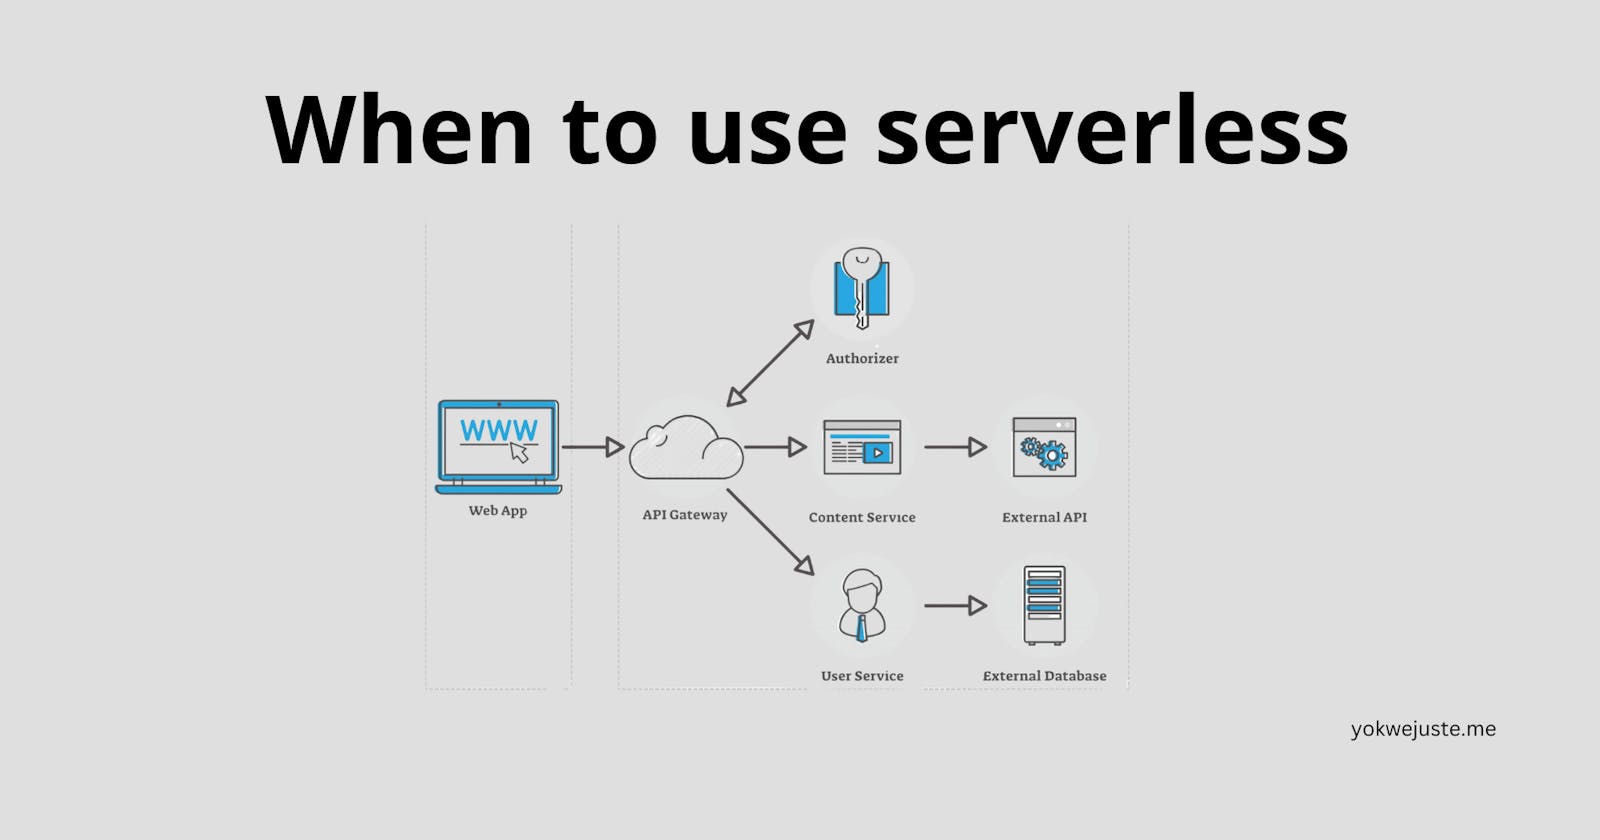 When to use serverless?